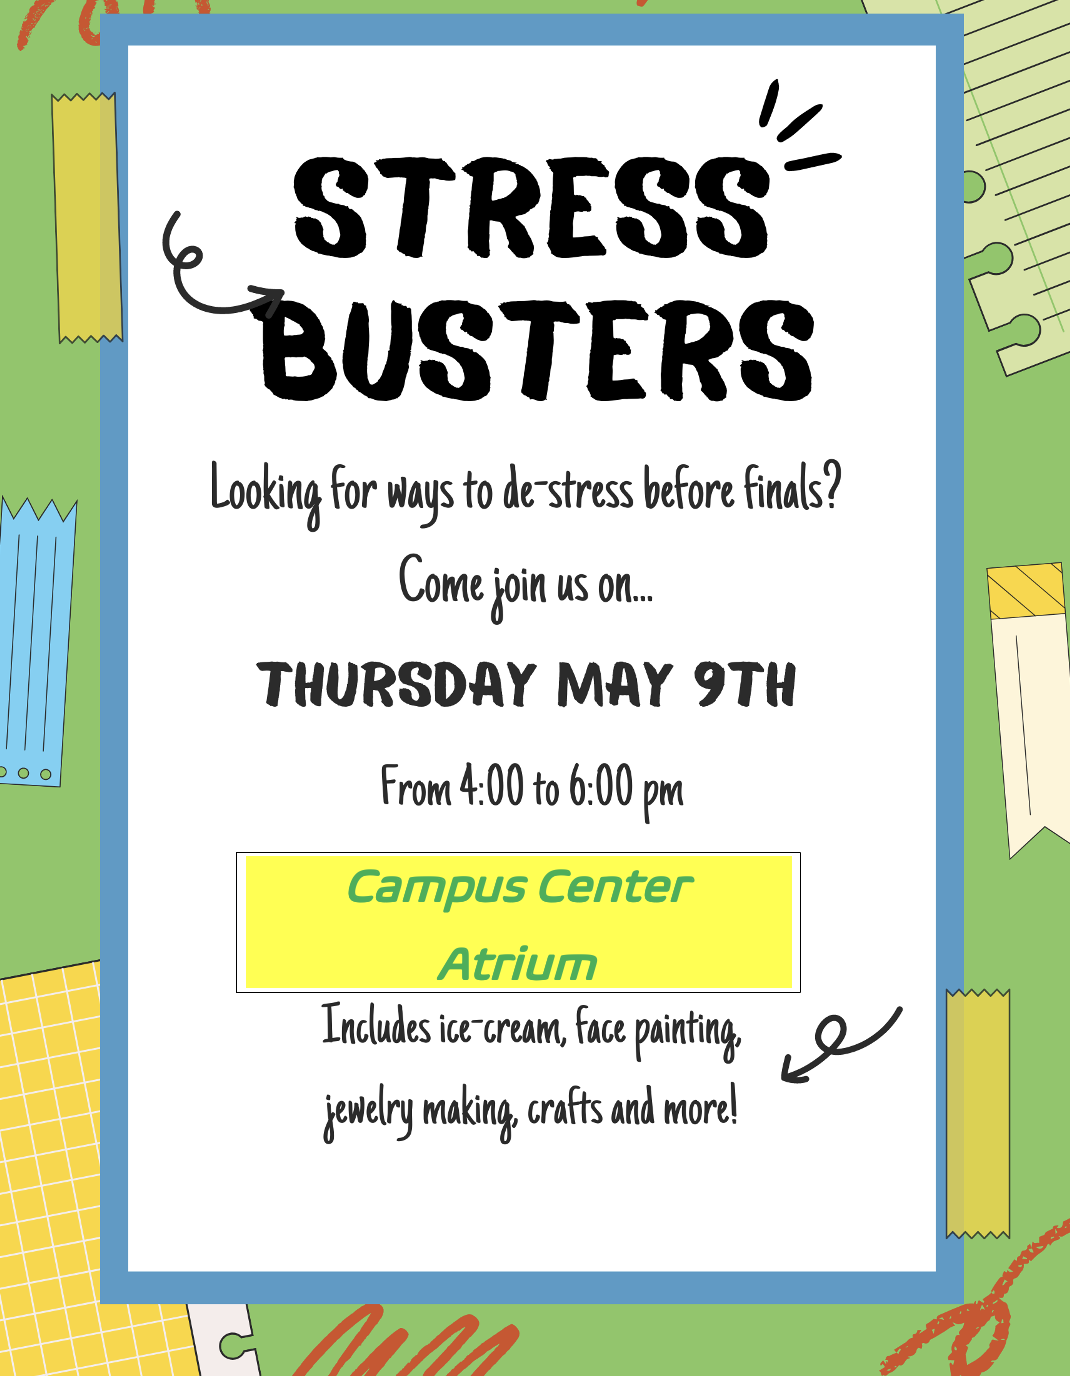 Looking for ways to de-stress before finals?

Come join the Wellness Center in their annual event:

Stress Busters!

Thursday, May 9th

4-6 pm | Campus Center Atrium

Including ice-cream, face-painting, jewelry-making, crafts and more!!

on a colorful scrapbook background